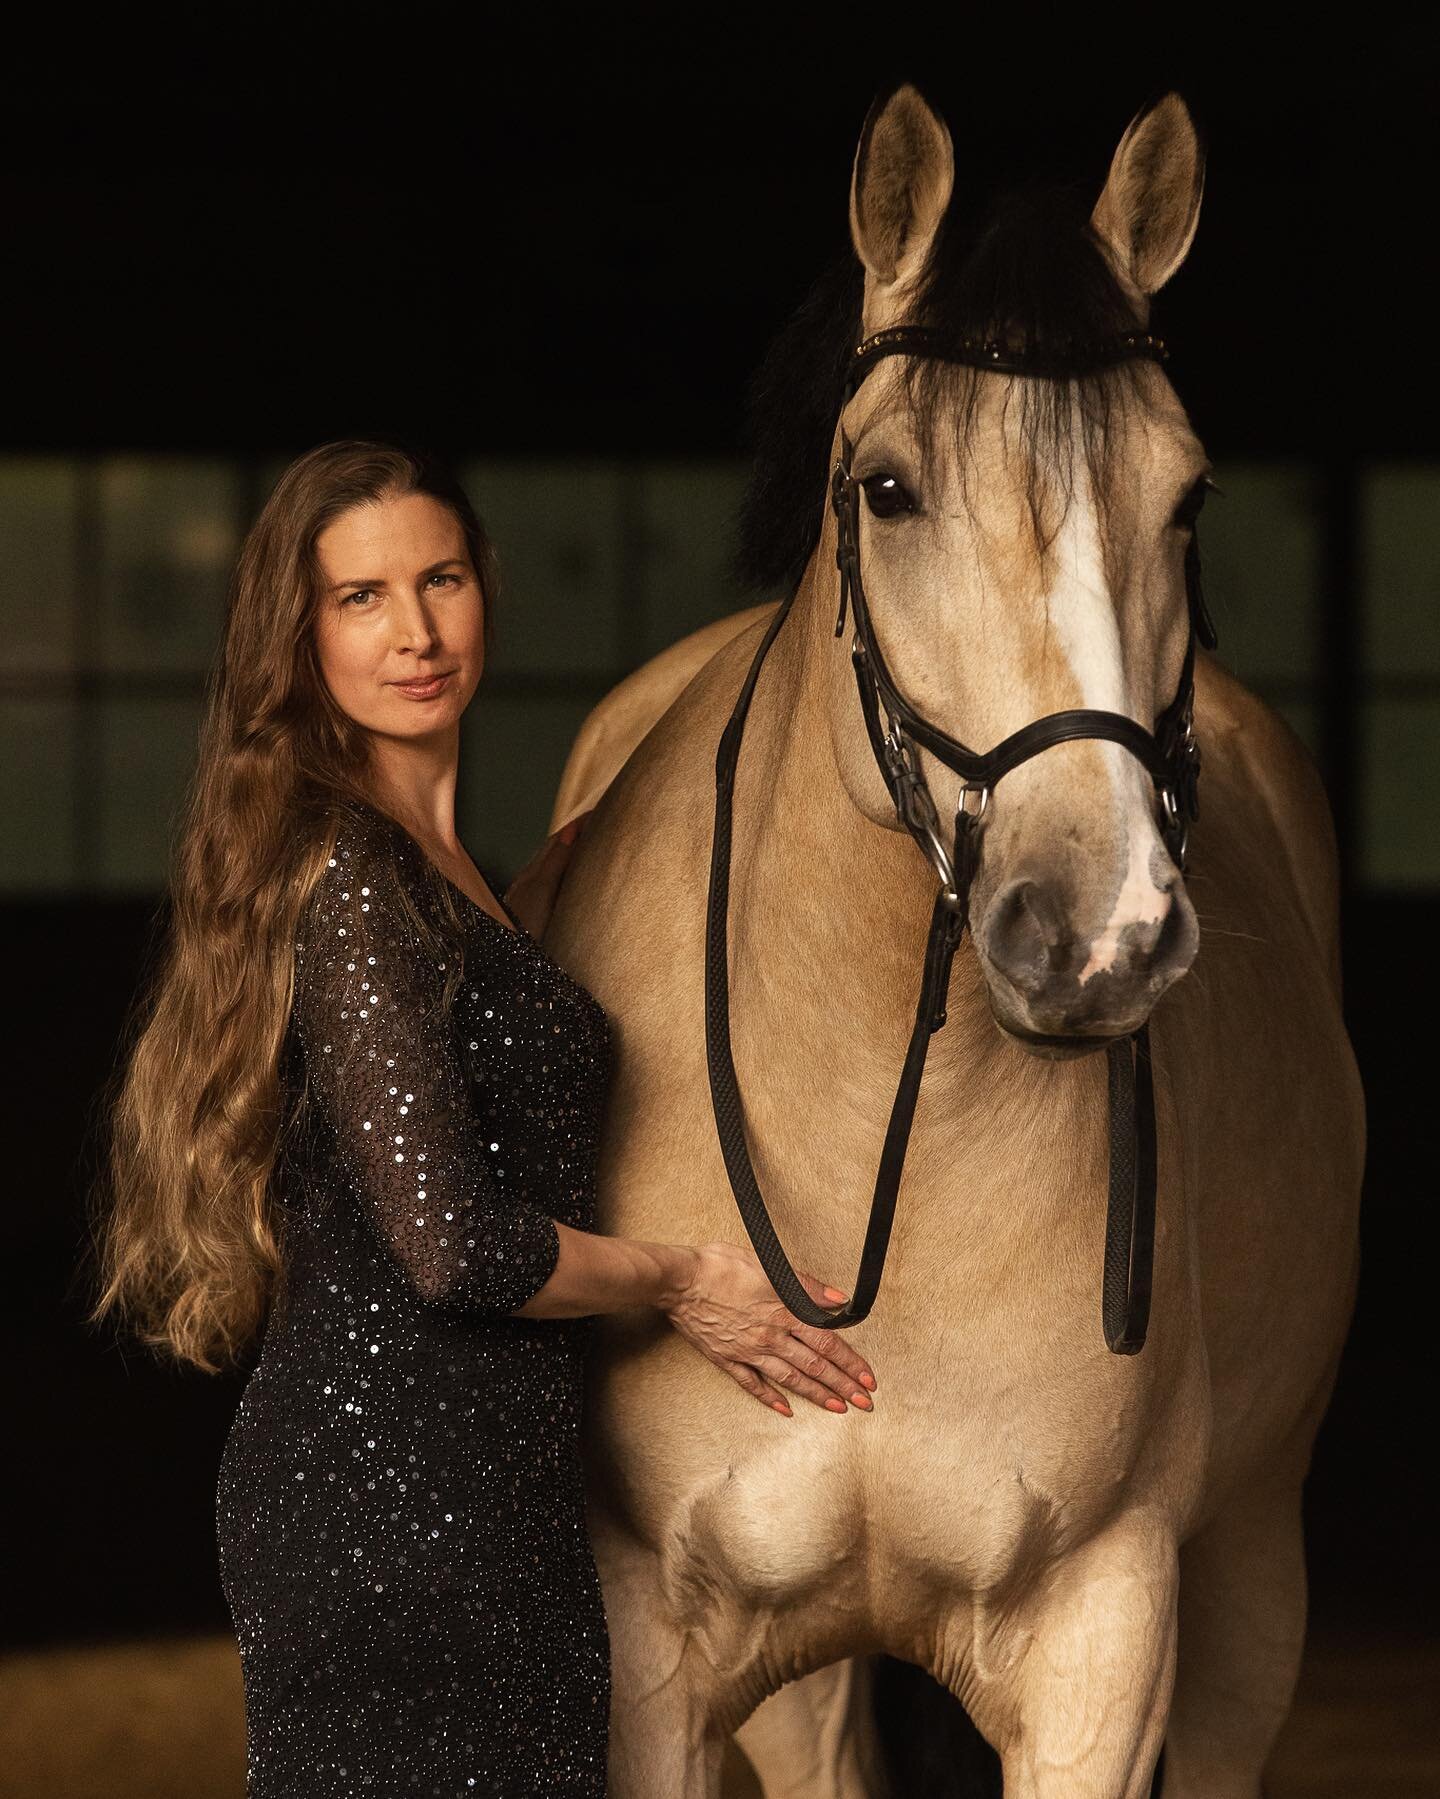 &ldquo;Elegance must be the right combination of distinction, naturalness, care and simplicity. Outside this, believe me, there is no elegance. Only pretension.&rdquo; -Spoken by Christian Dior &amp; exemplified by Sarah &amp; Worthy 🐴✨